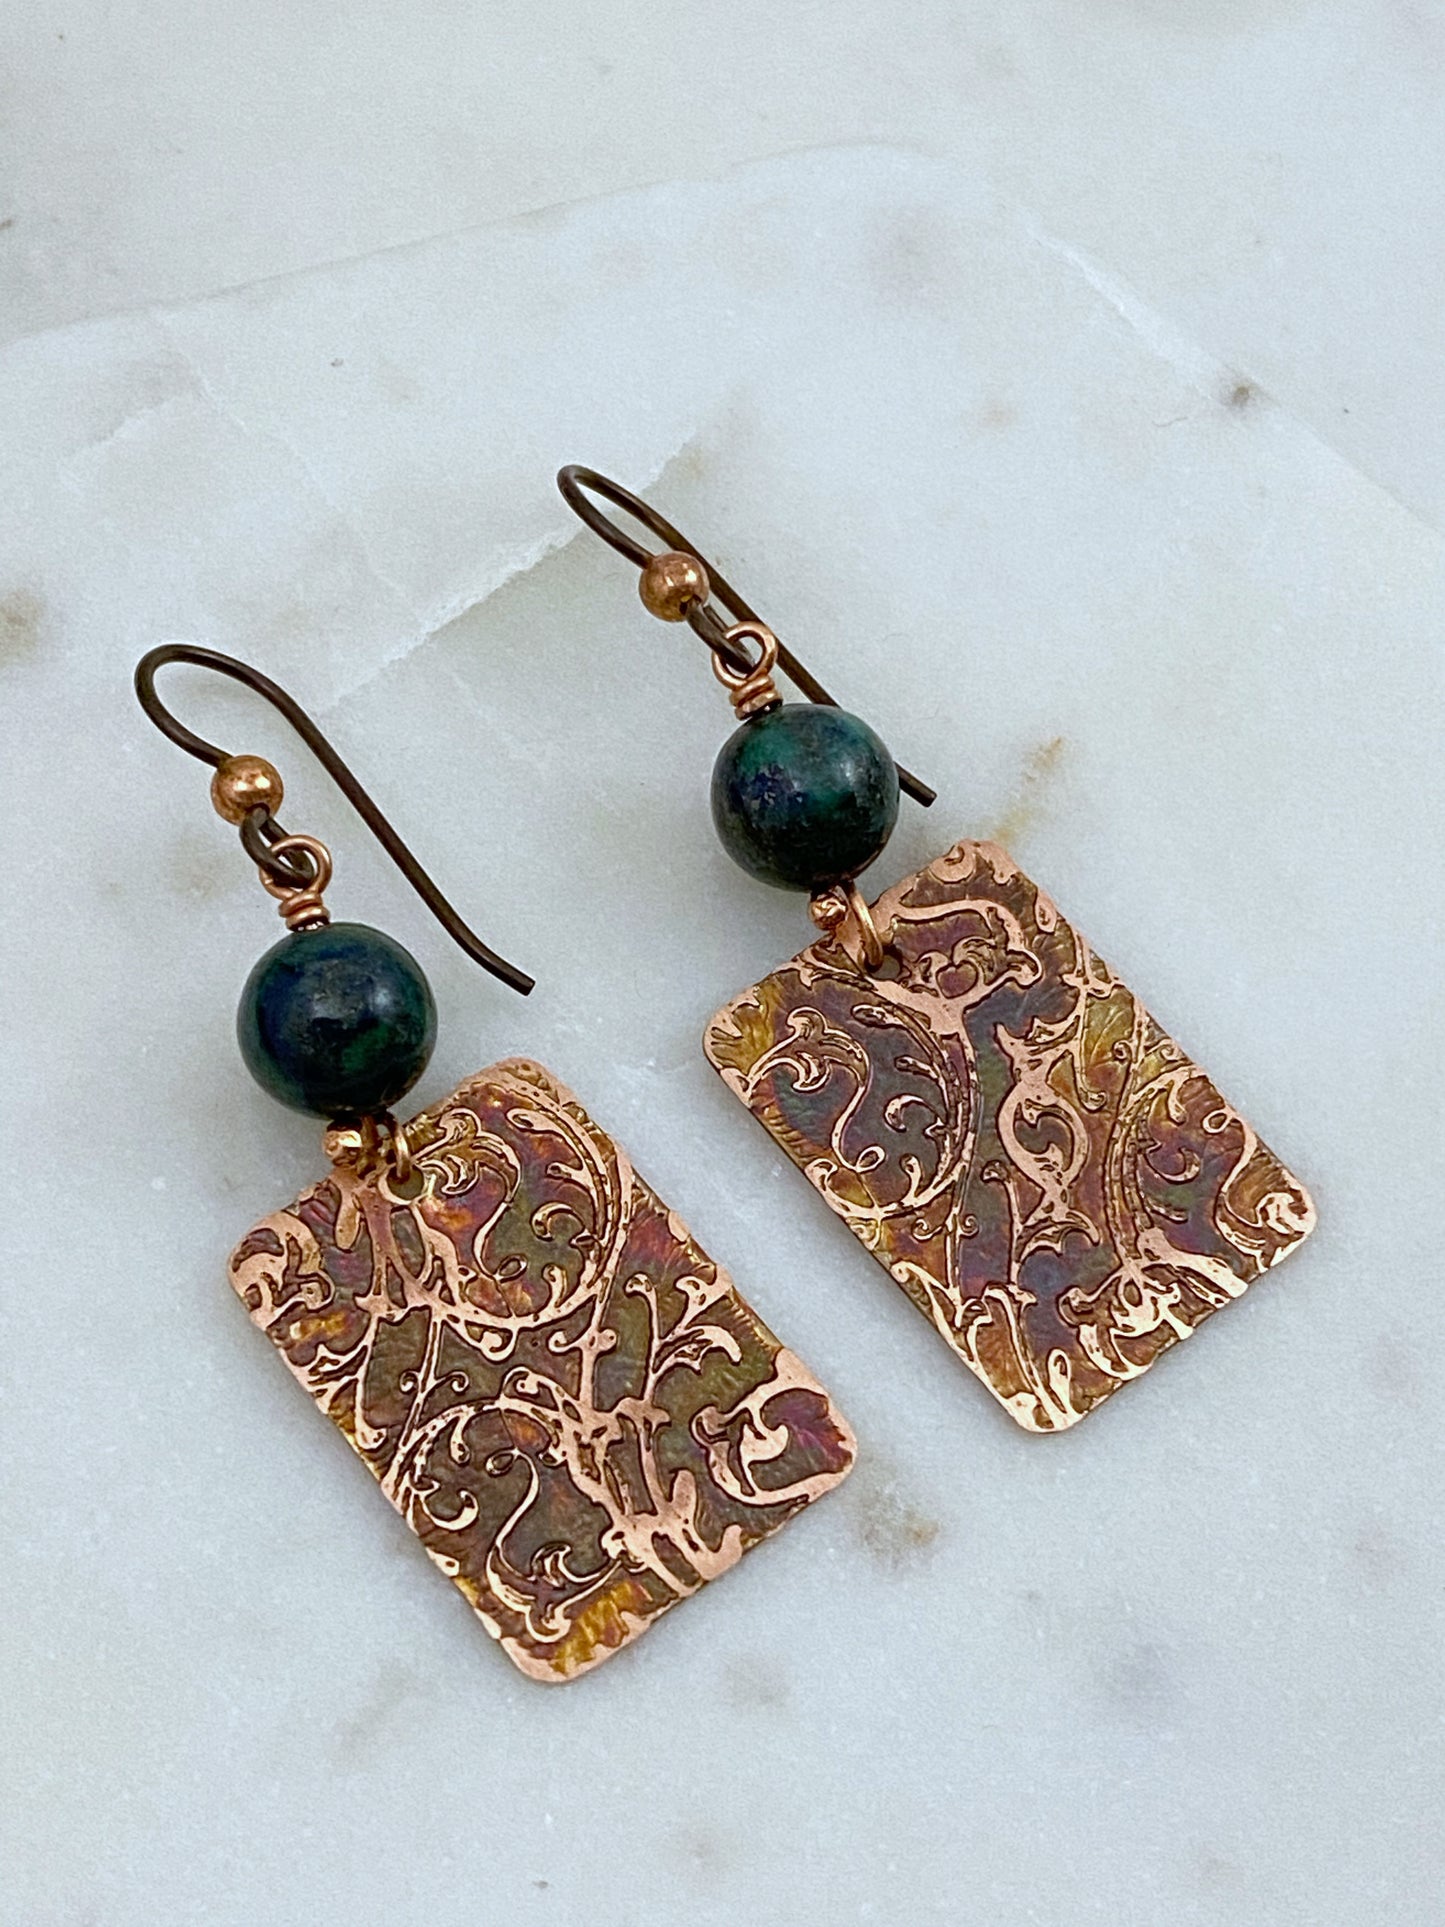 Acid  etched copper earrings with azurite chrysocolla gemstones